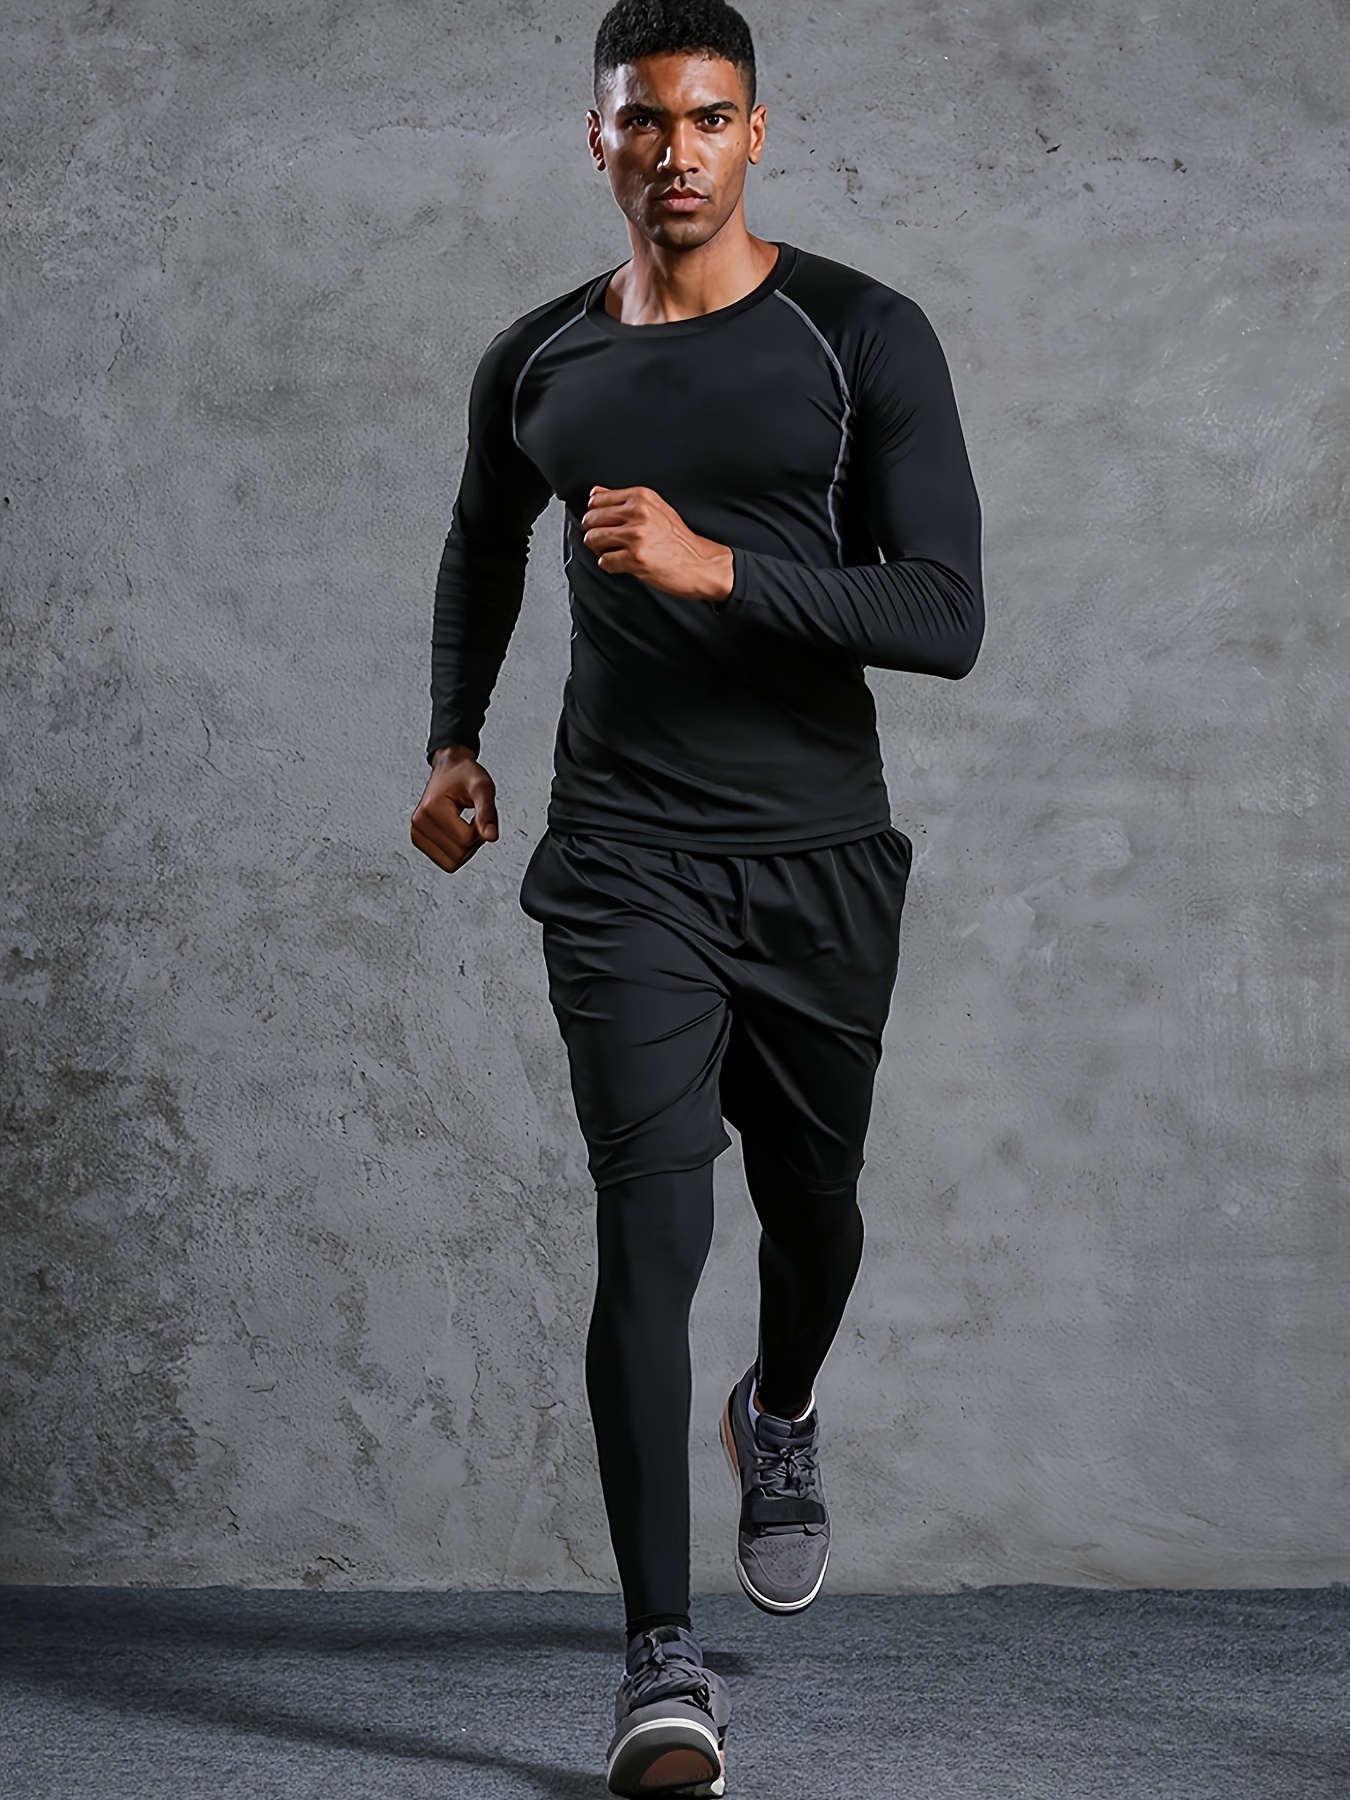 Compression Shirts for Men - Athletic Short Sleeve Body Shaper Workout  T-Shirt Fitness Quick Dry Baselayer Running Tops